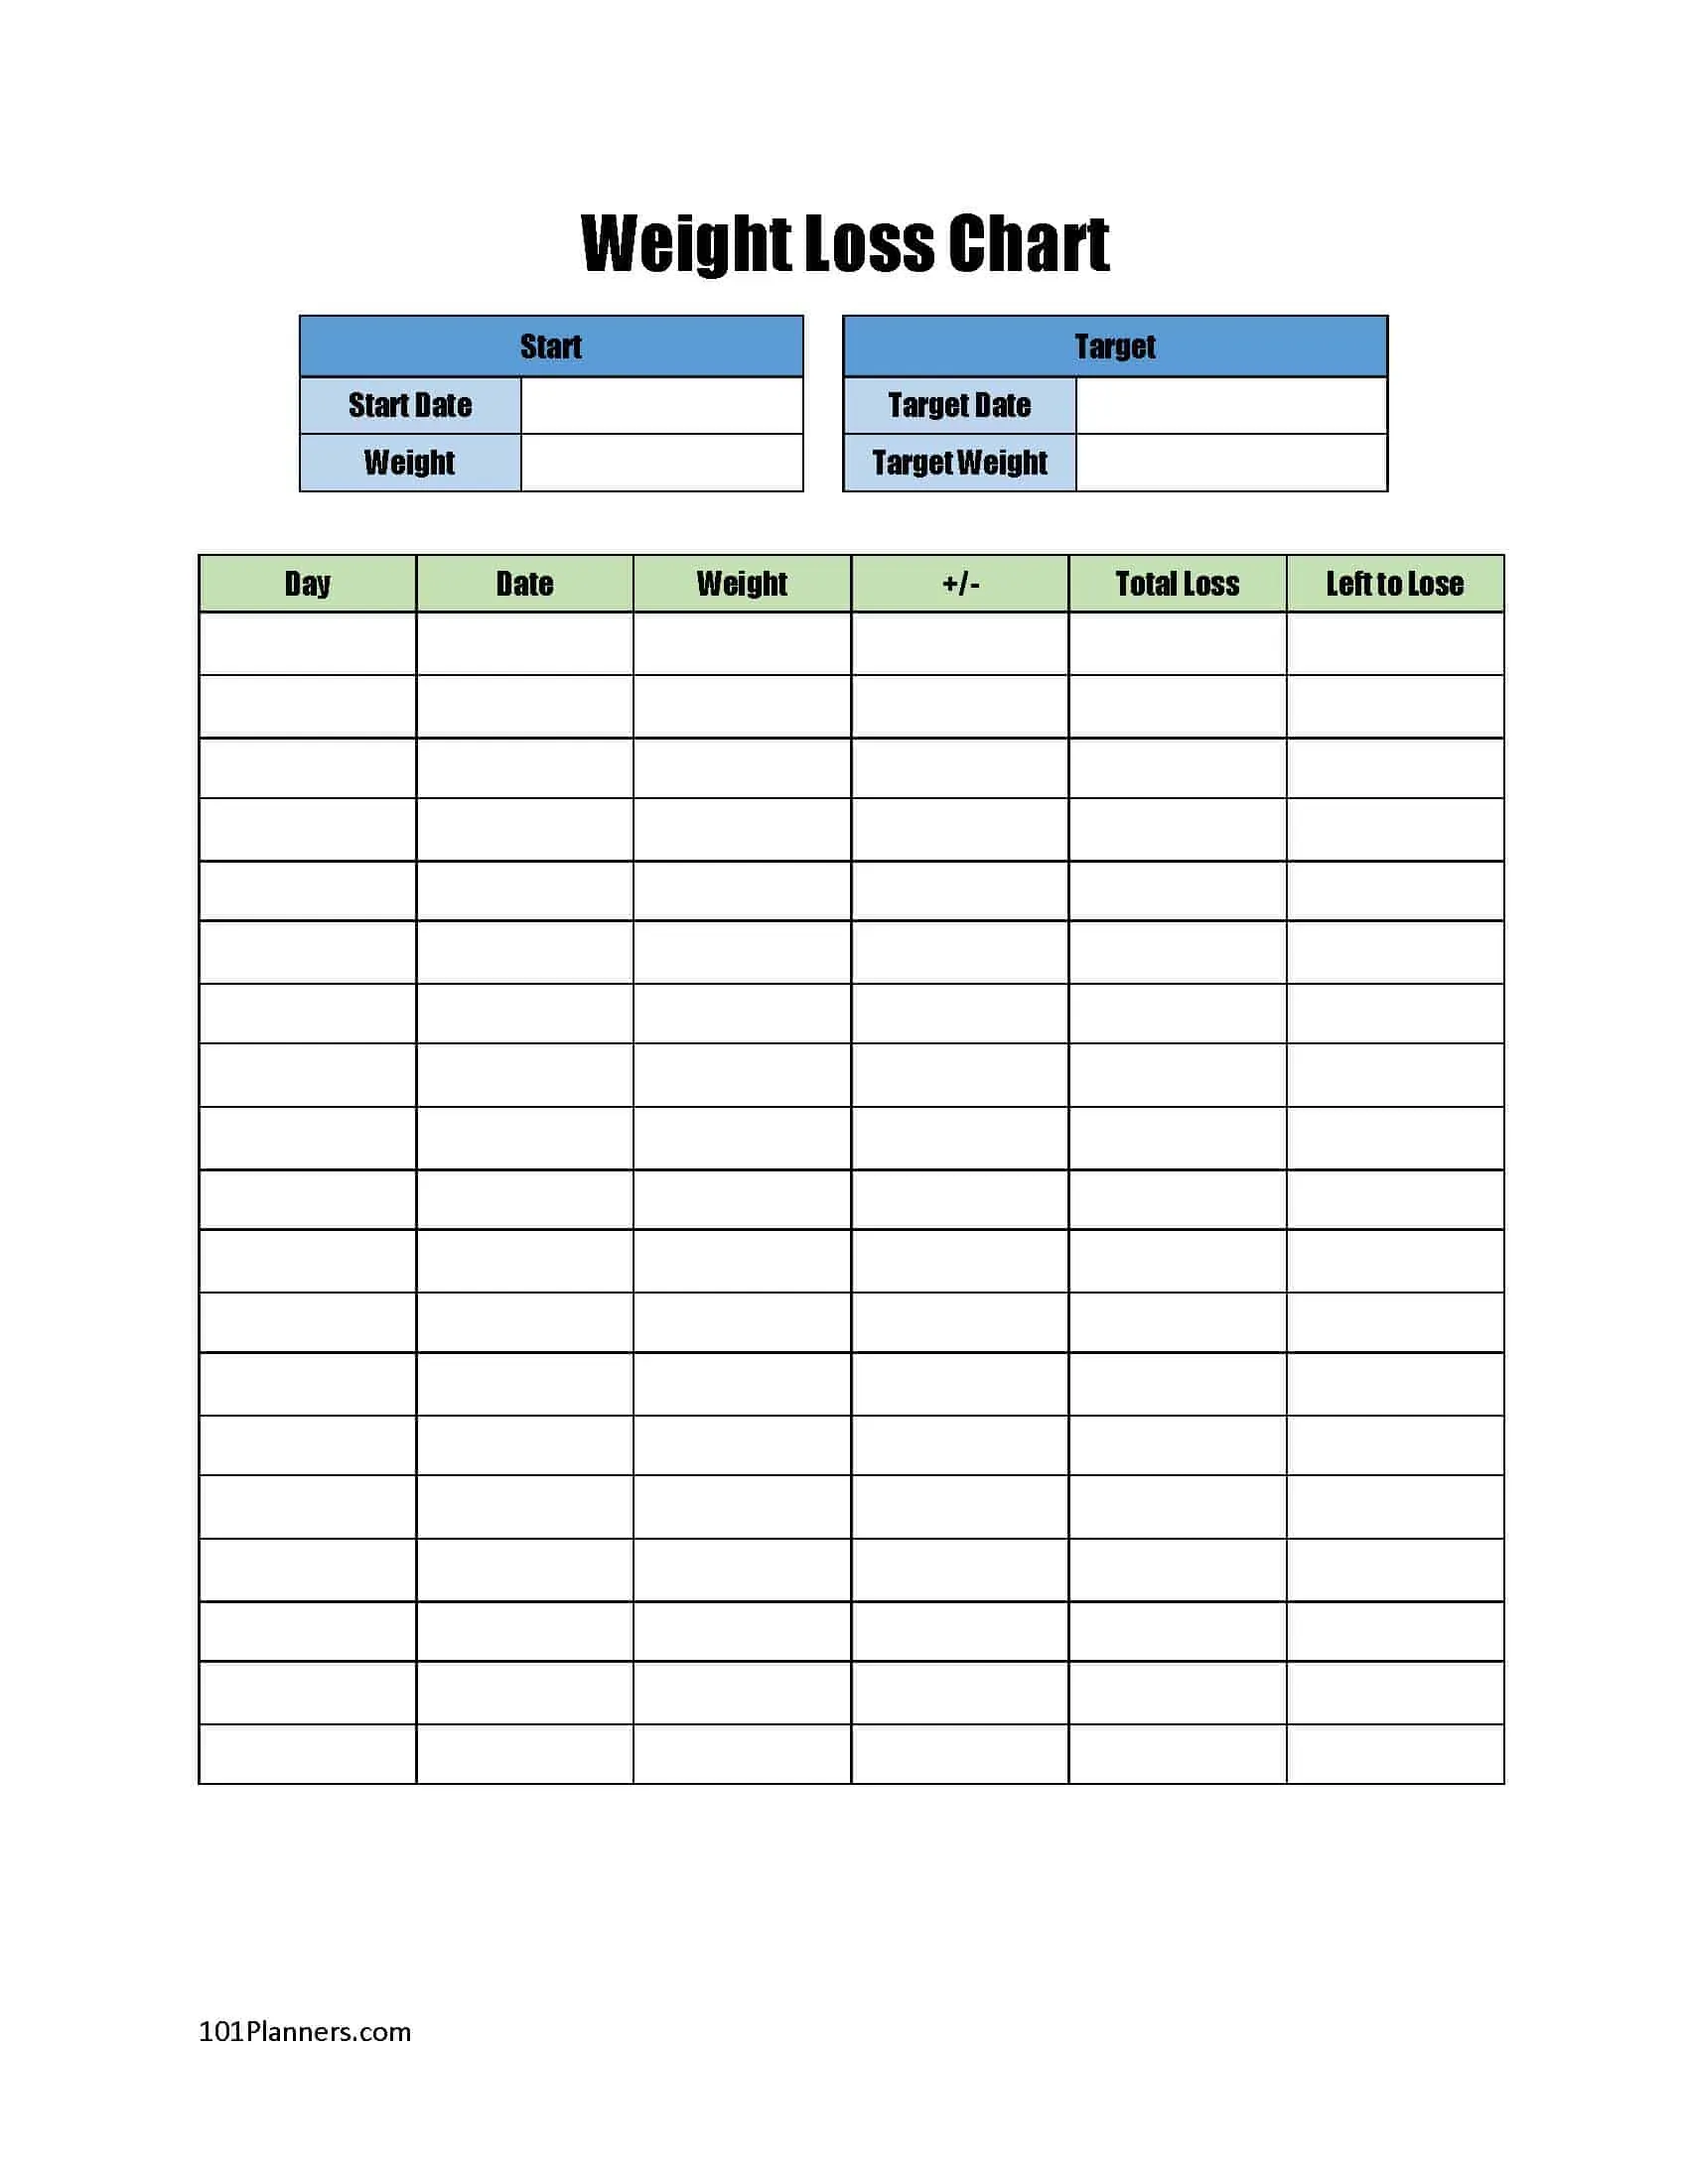 https://www.101planners.com/wp-content/uploads/2020/05/Daily-Weight-Loss-Chart.webp